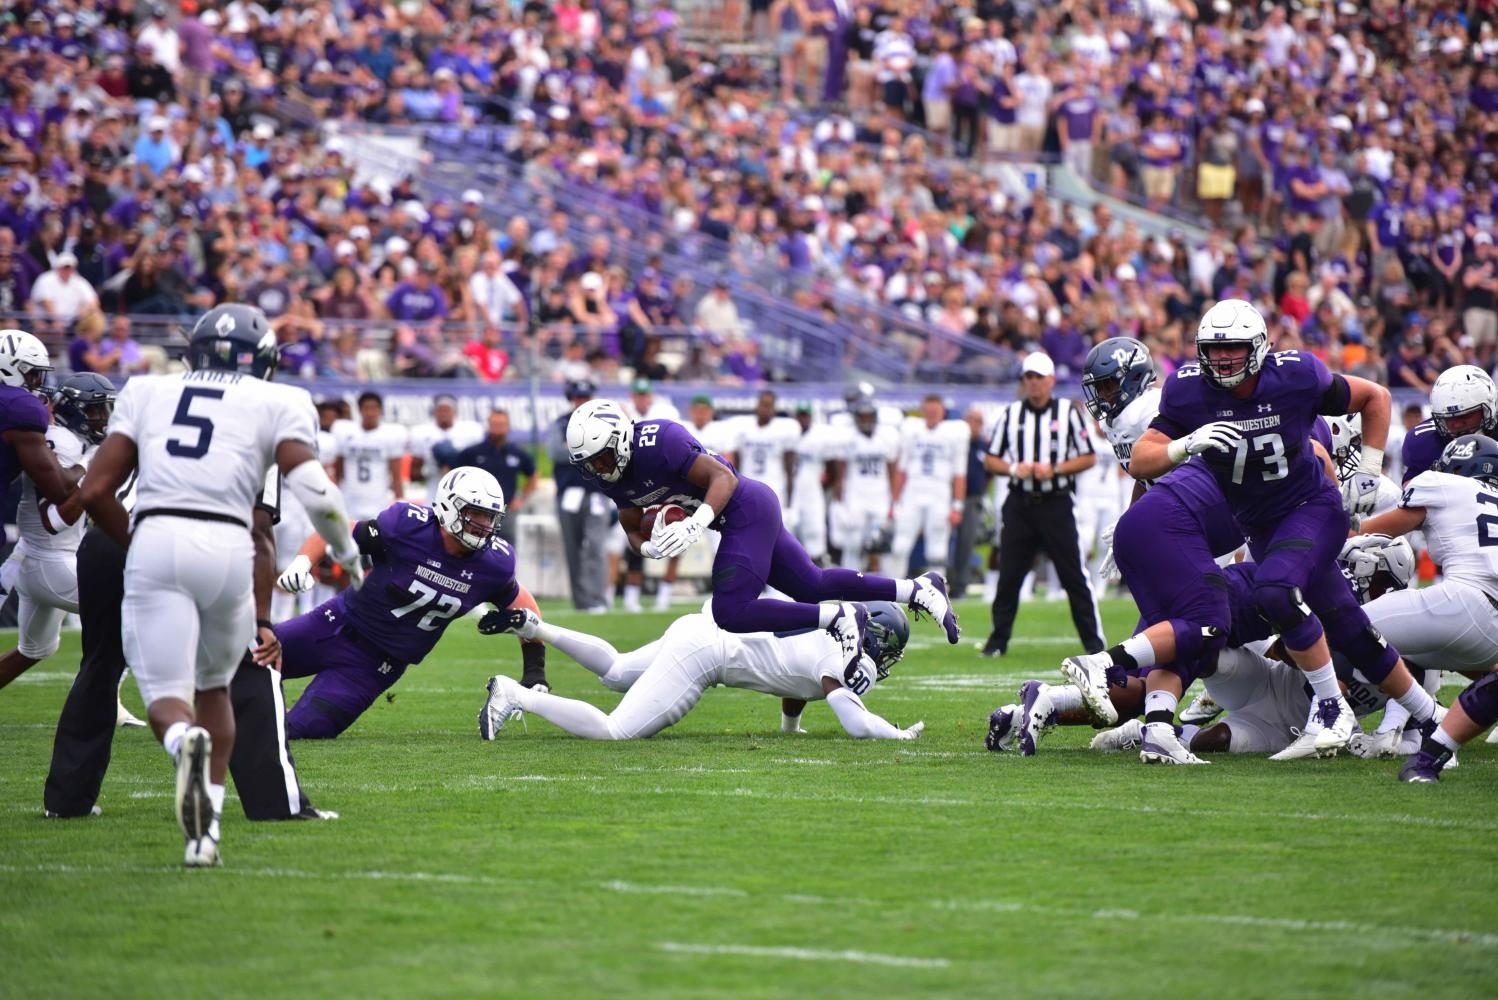 Jeremy+Larkin+dives+forward.+The+redshirt+freshman+and+the+Wildcats+pulled+out+a+win+against+Nevada+on+Saturday.